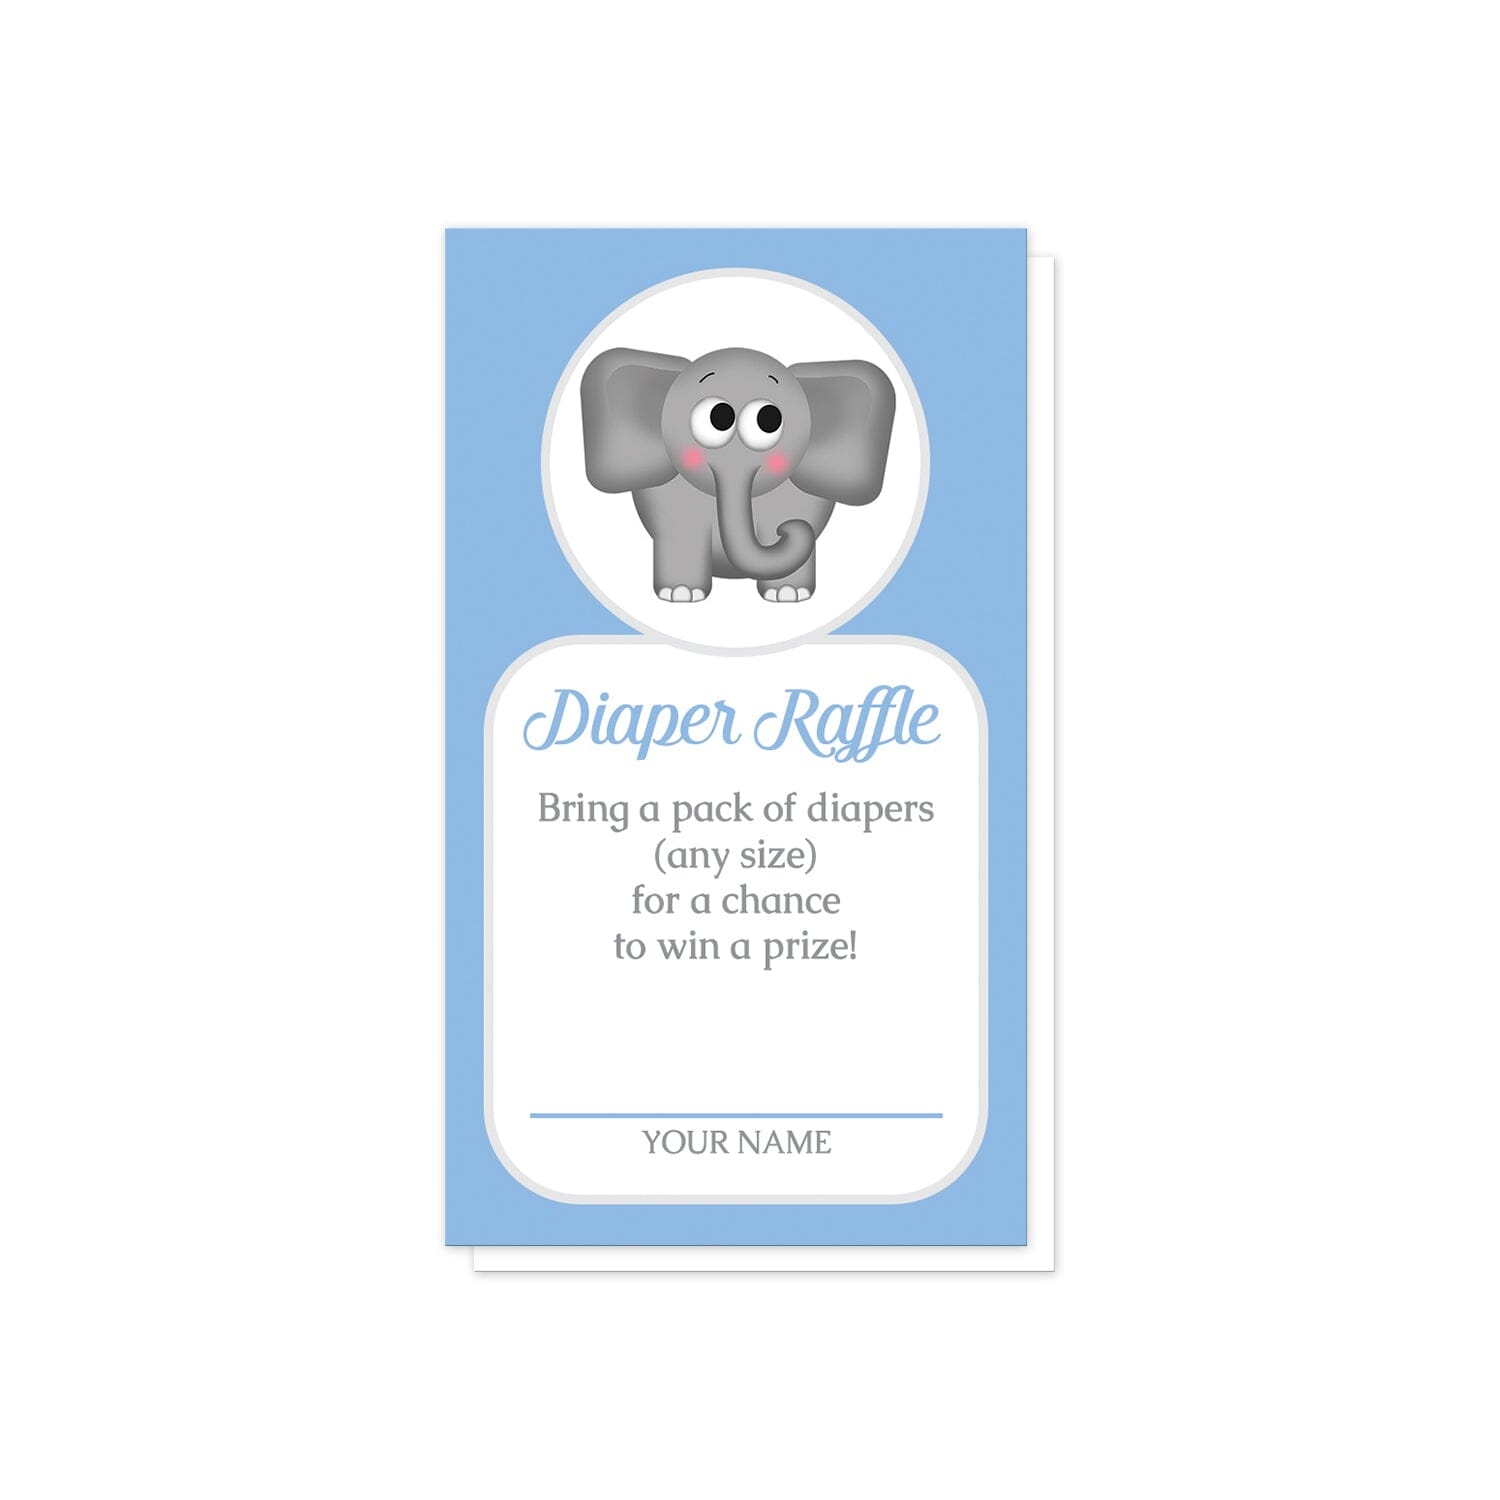 Cute Elephant Blue Diaper Raffle Cards at Artistically Invited. Cute elephant blue diaper raffle cards illustrated with an affectionate and adorable gray elephant in a white circle over a blue background color. Your diaper raffle details are printed in blue and gray in a white rectangular area below the cute little elephant.